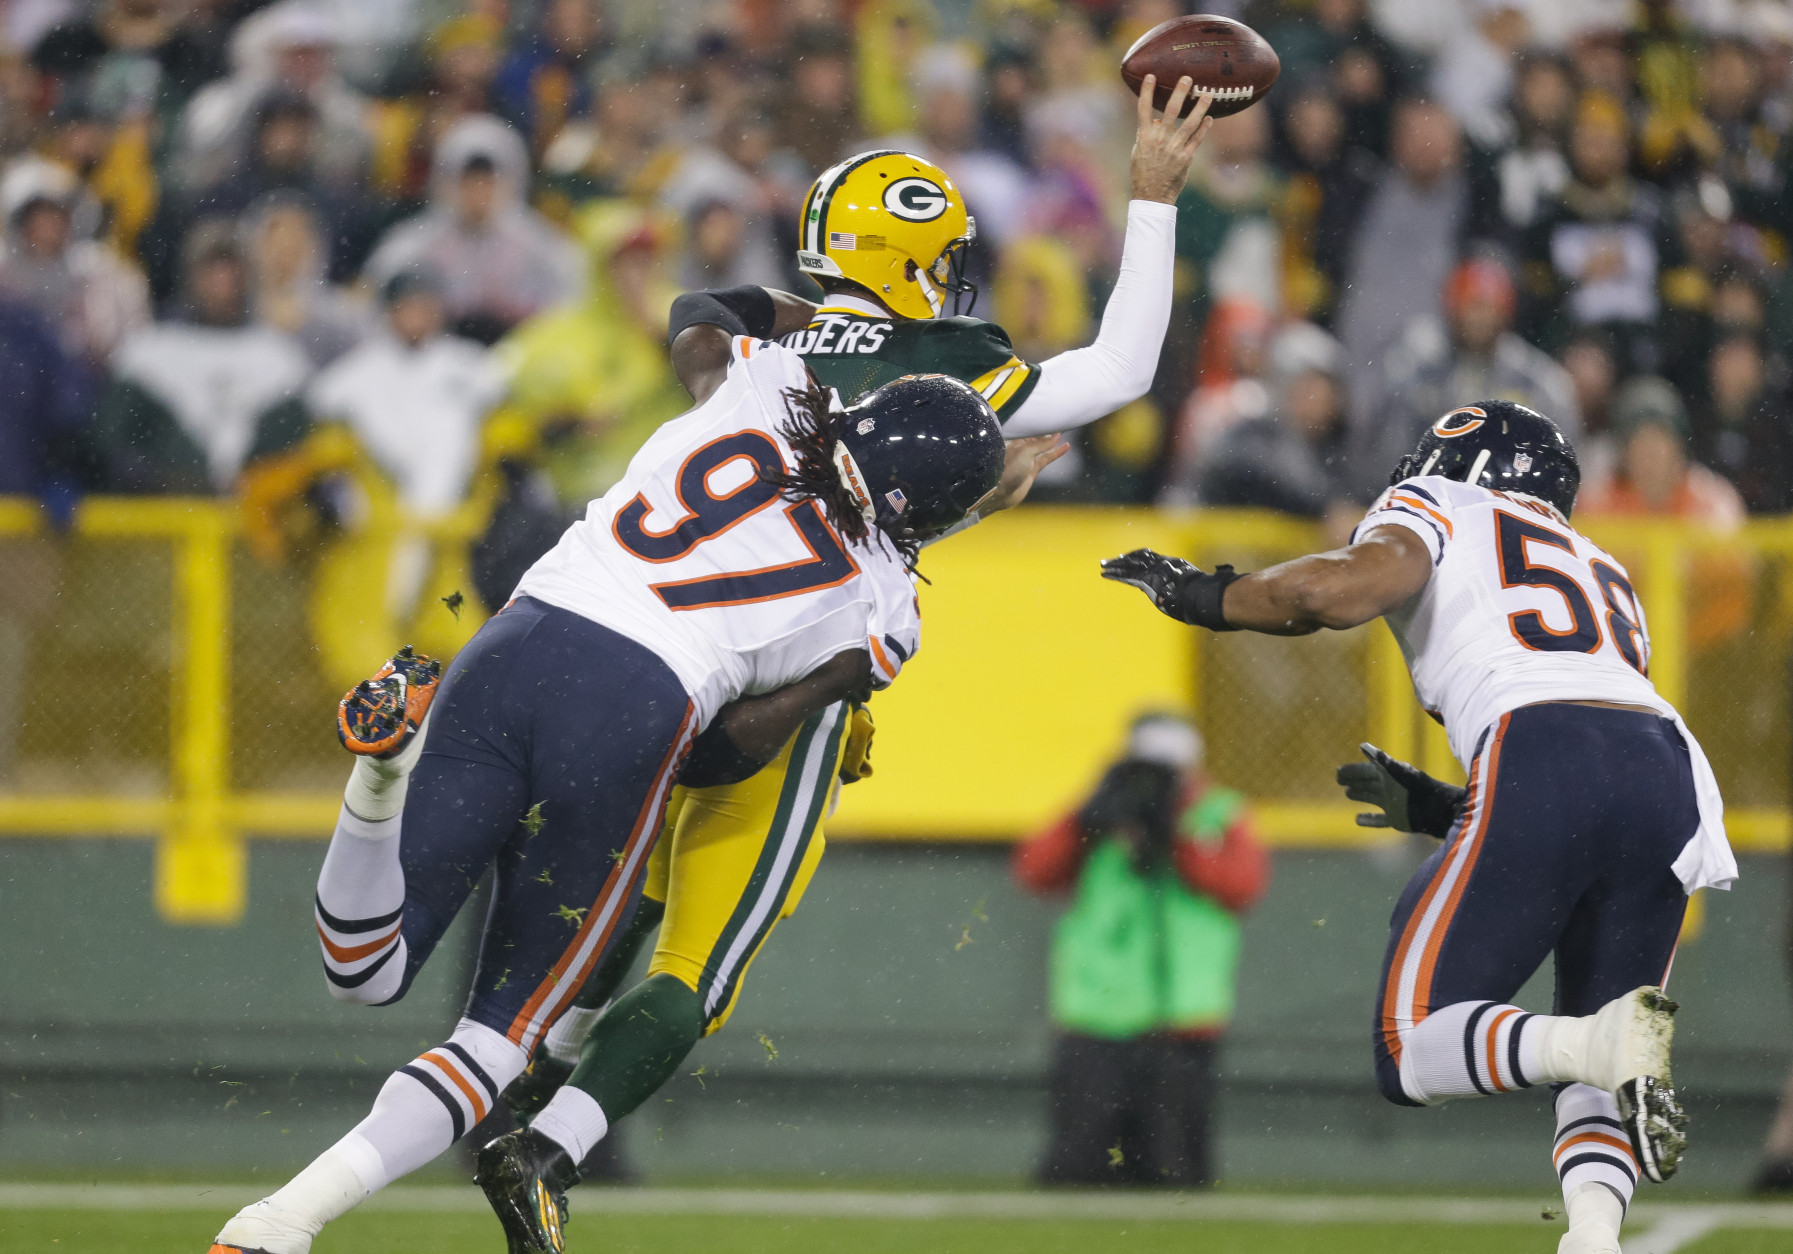 GREEN BAY, WI - NOVEMBER 26:  Quarterback  Aaron Rodgers #12 of the Green Bay Packers throws an incomplete pass as he is hit by  Willie Young #97 of the Chicago Bears in the first quarter at Lambeau Field on November 26, 2015 in Green Bay, Wisconsin.  (Photo by Mike McGinnis/Getty Images)